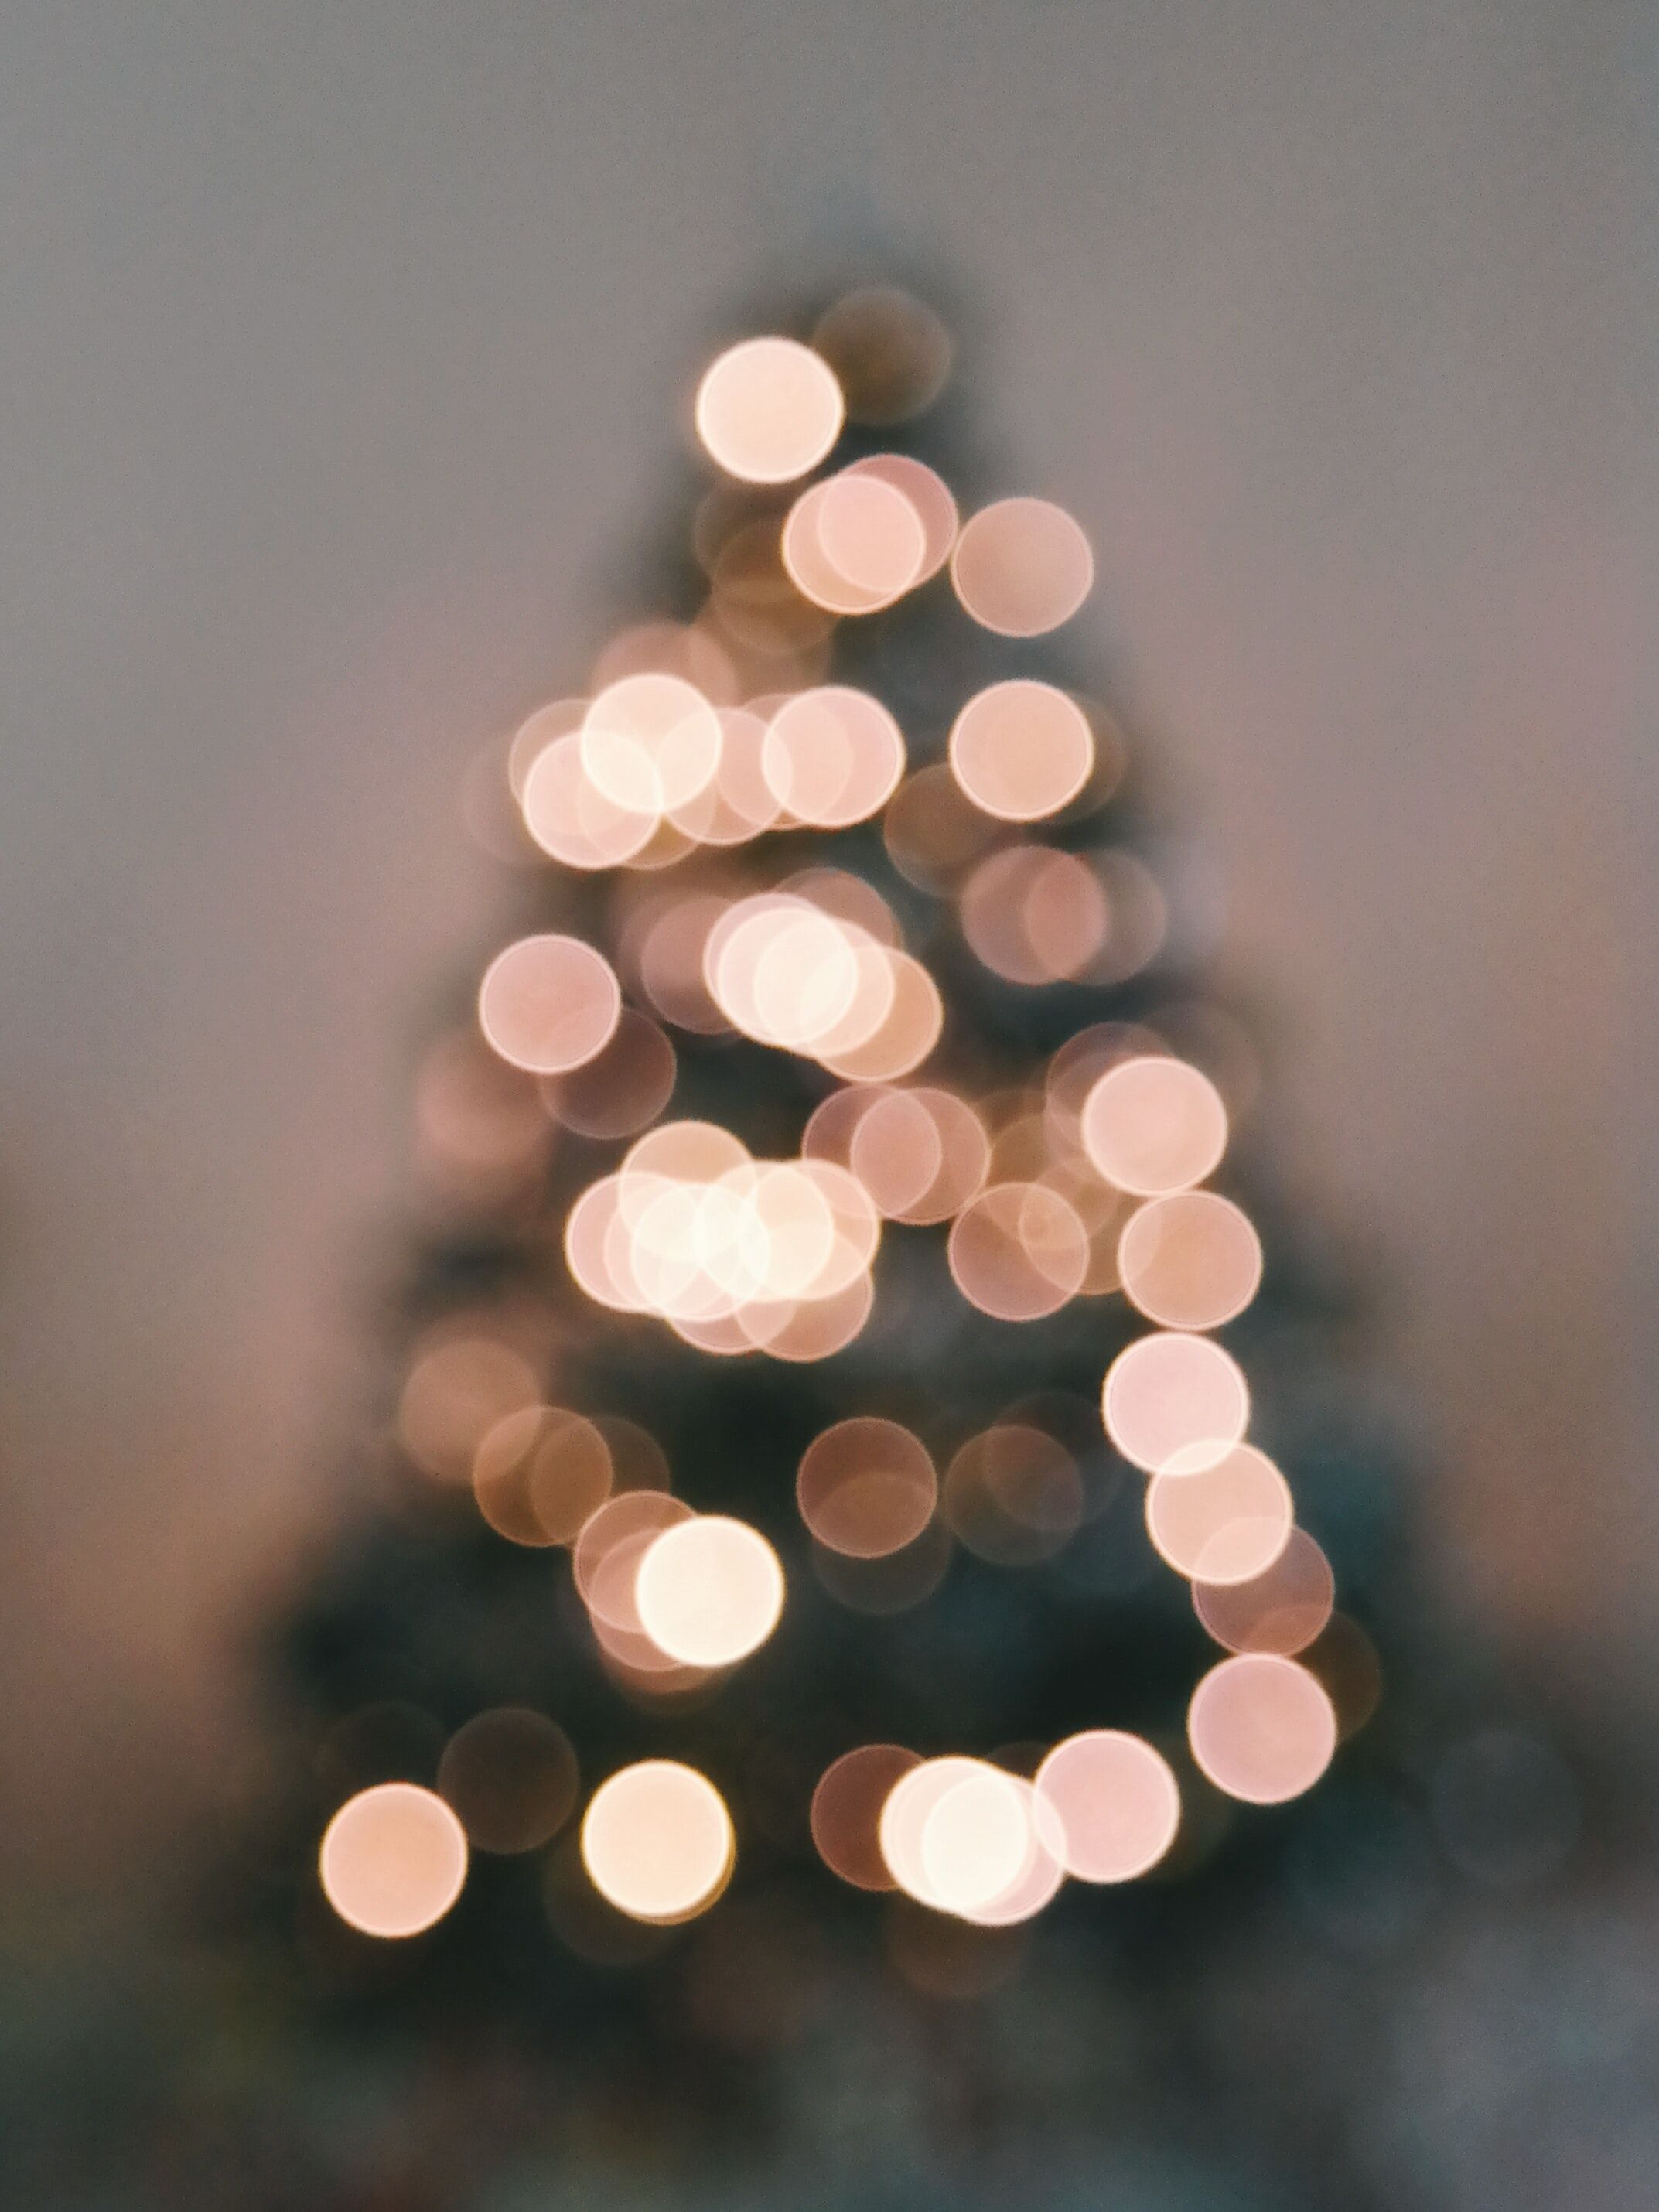 A blurry photo of a Christmas tree with white lights. - Christmas, blurry, white Christmas